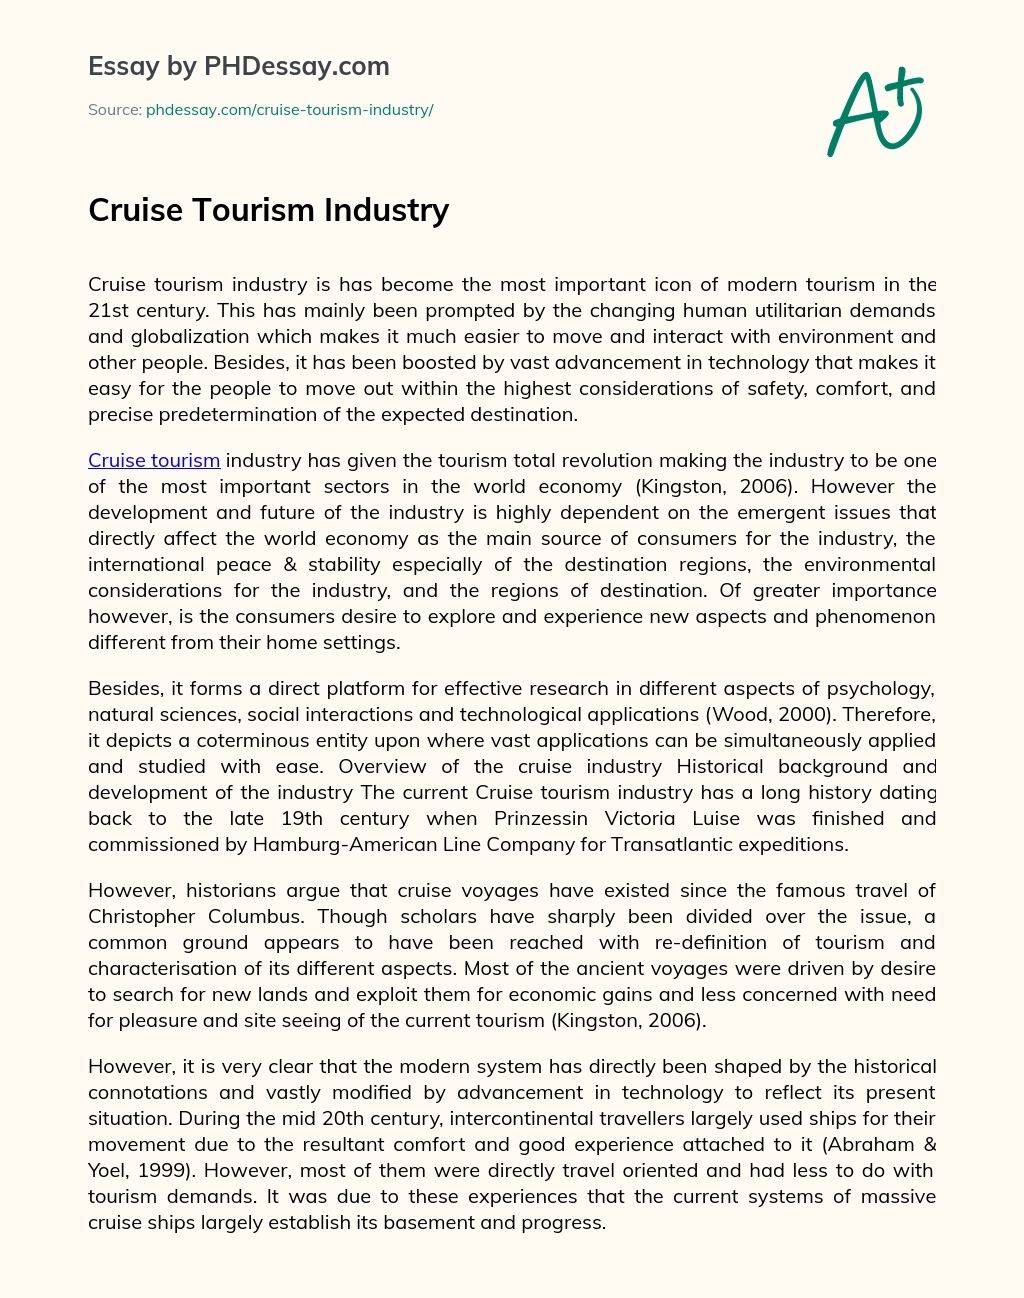 Cruise Tourism Industry essay